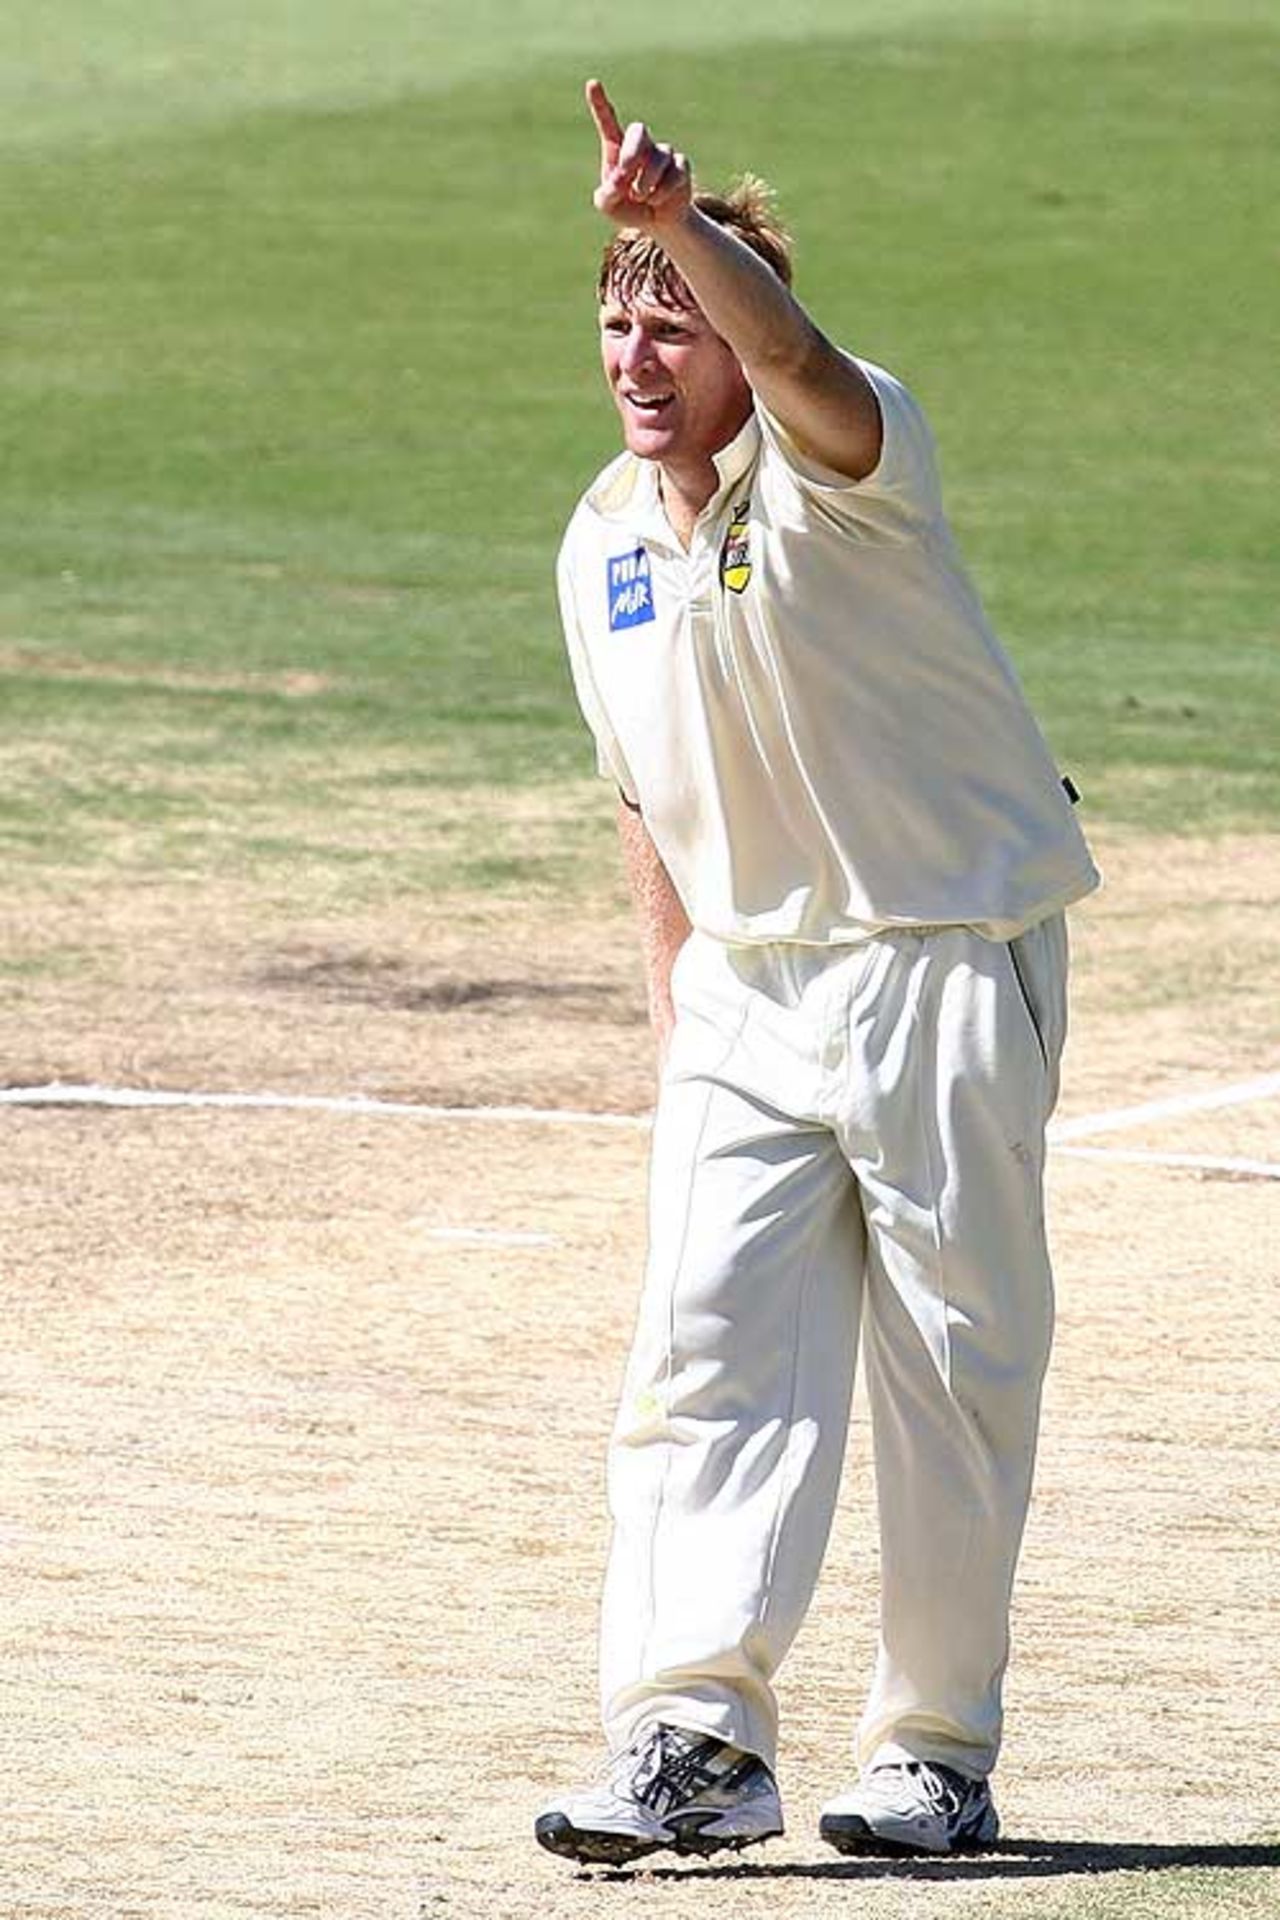 Mathew Inness' 4 for 44 helped Western Australia to victory, Western Australia v Tasmania, Pura Cup, Perth, 4th day, March 10, 2008 
